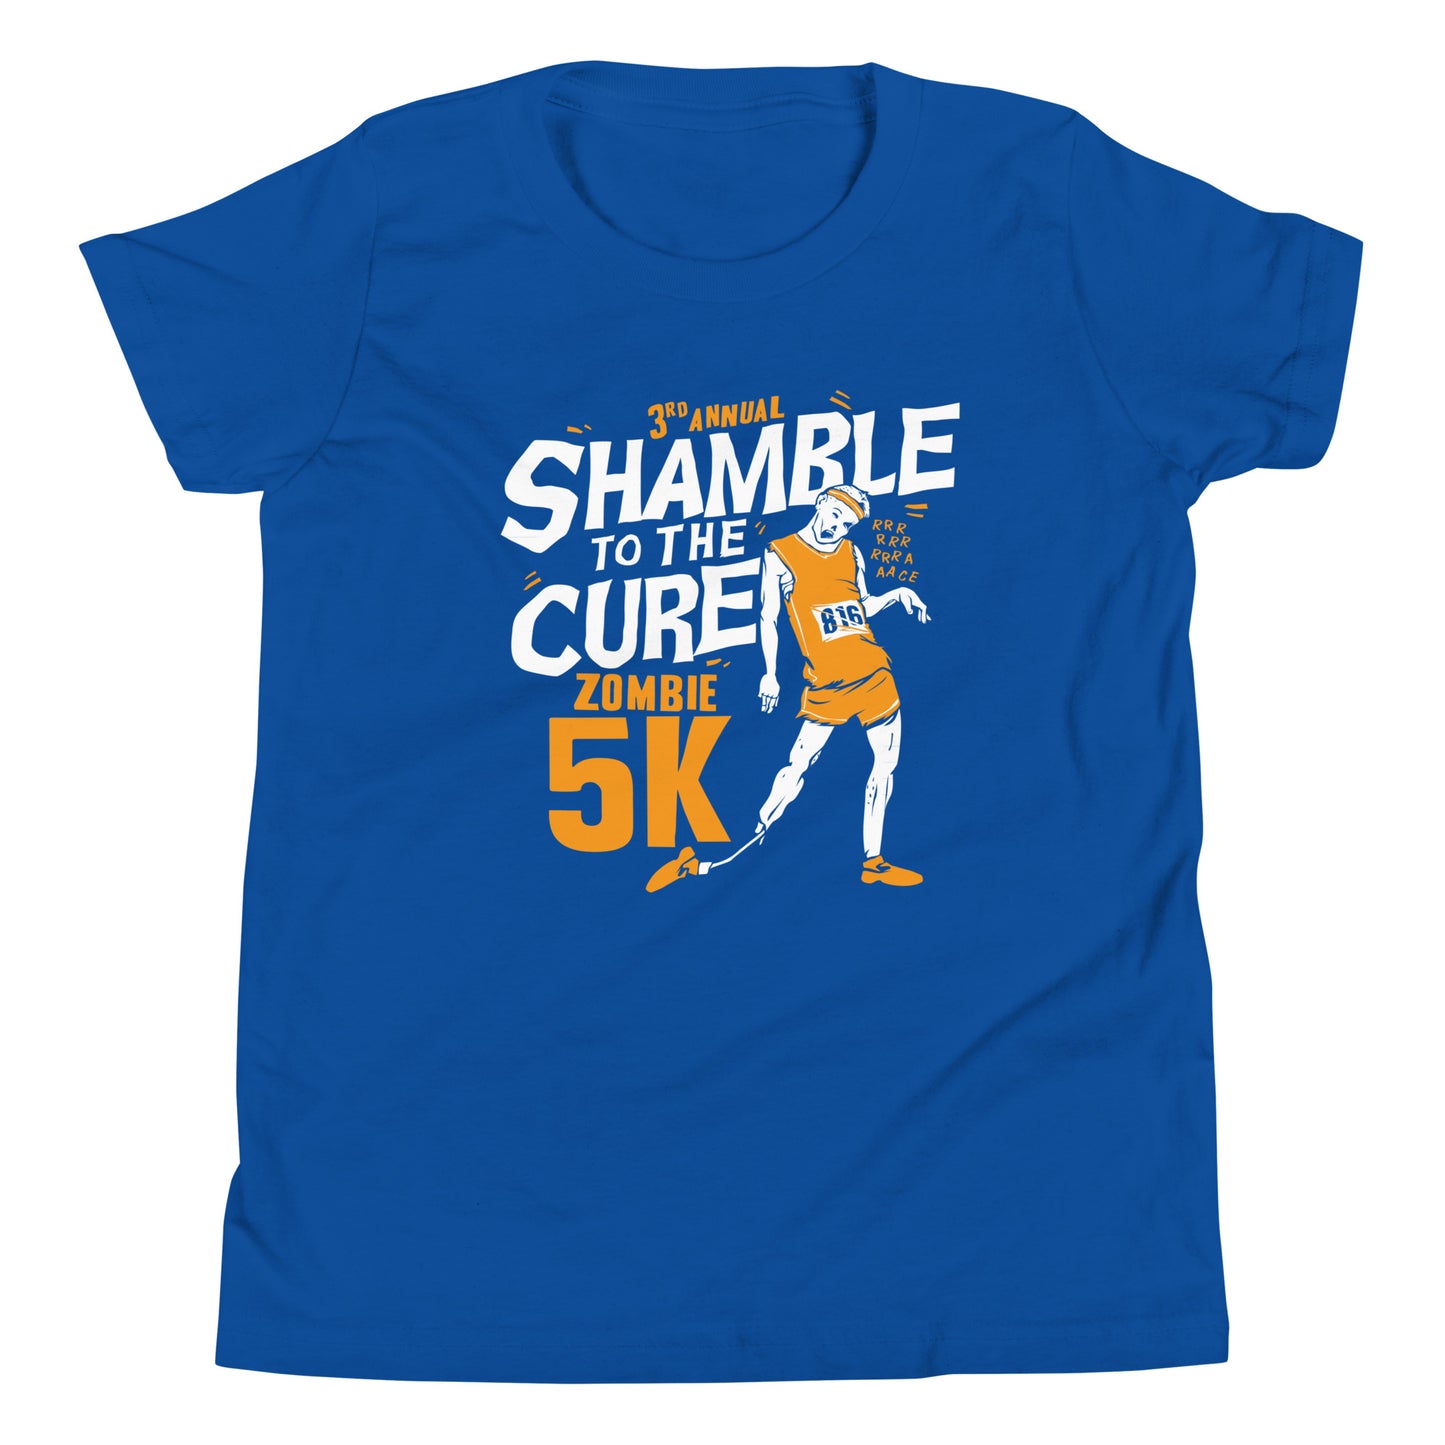 Shamble To The Cure Zombie 5K Kid's Youth Tee